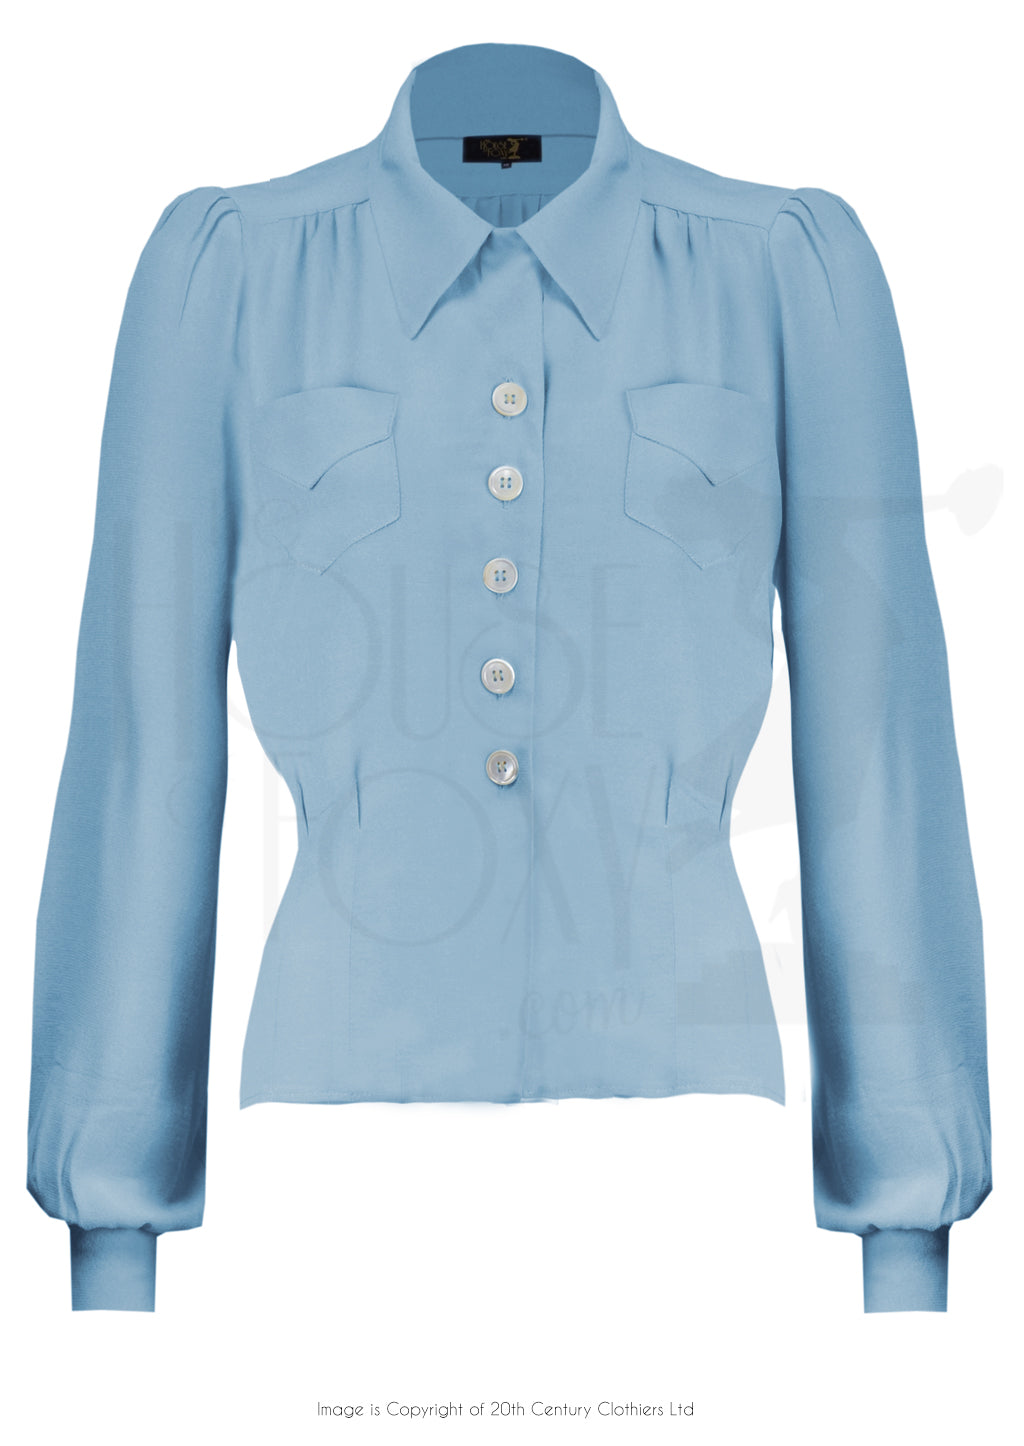 House of Foxy 1940’s Sweetheart Blouse in Powder Blue